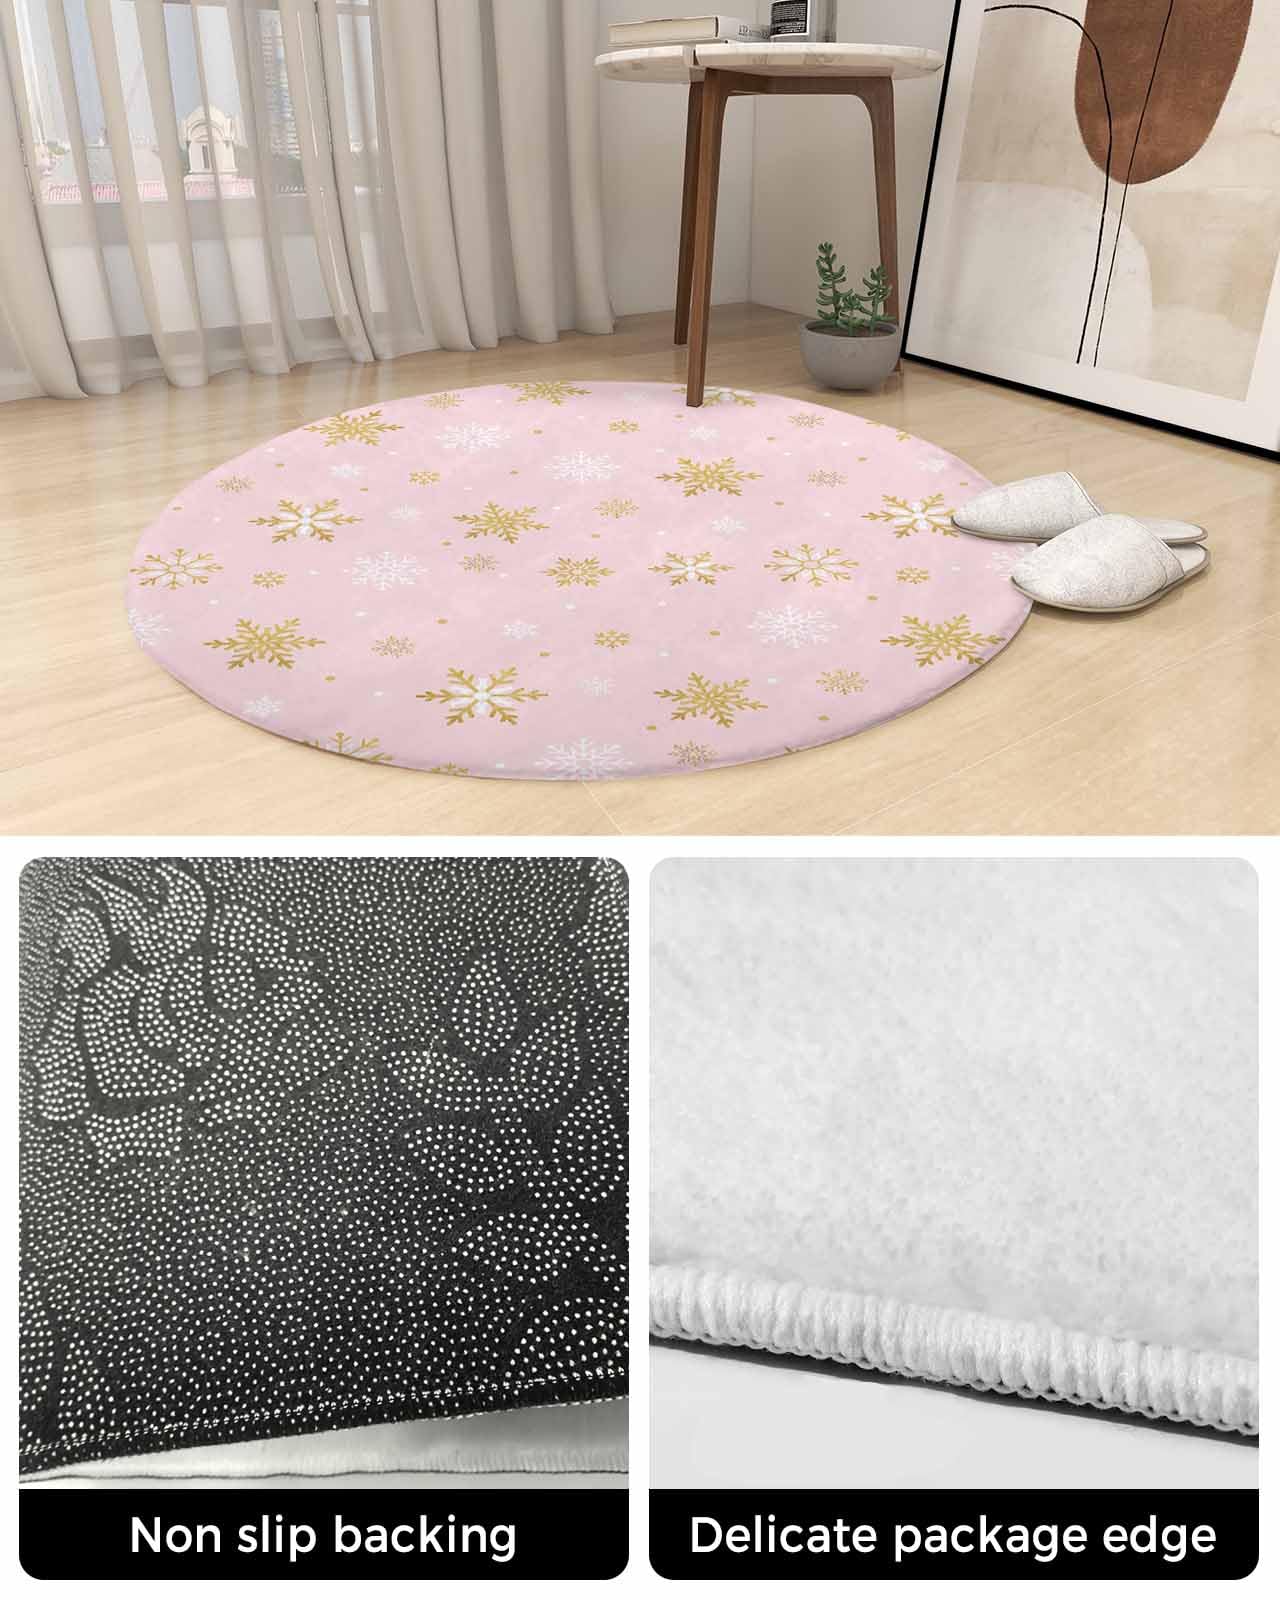 Blush Pink Snowflake Fluffy Round Area Rug Carpets 3.3ft, Plush Shaggy Carpet Soft Circular Rugs, Non-Slip Fuzzy Accent Floor Mat for Living Room Bedroom Nursery Merry Christmas Romantic Gold White